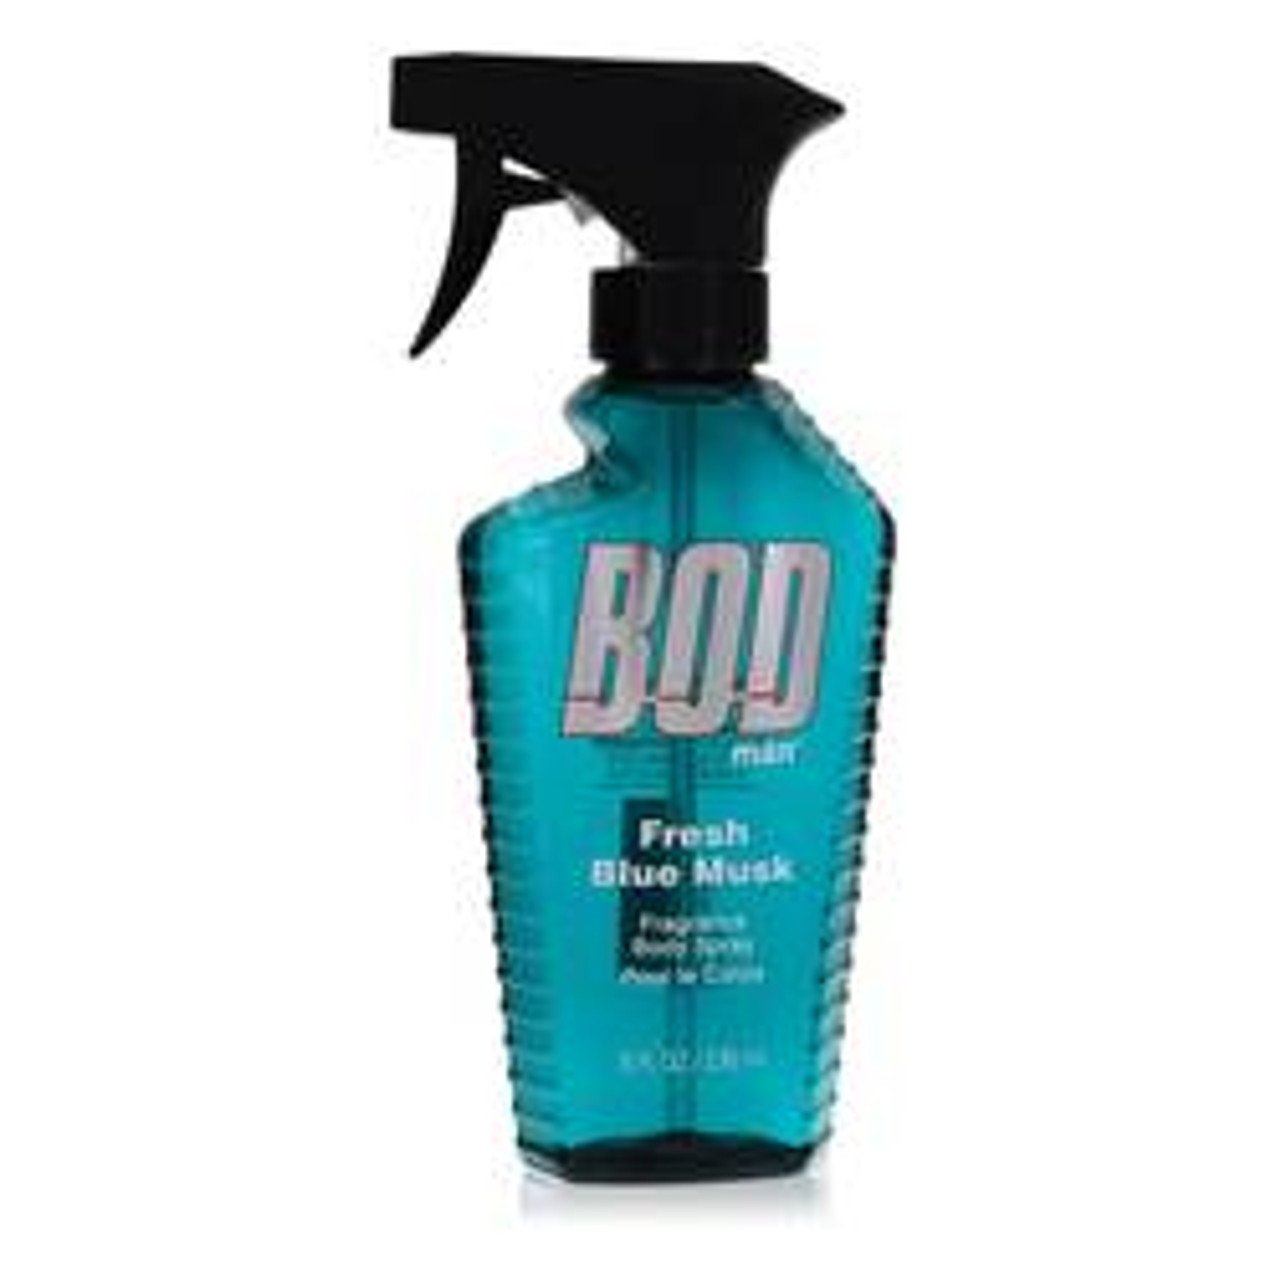 Bod Man Fresh Blue Musk Cologne By Parfums De Coeur Body Spray 8 oz for Men - [From 27.00 - Choose pk Qty ] - *Ships from Miami